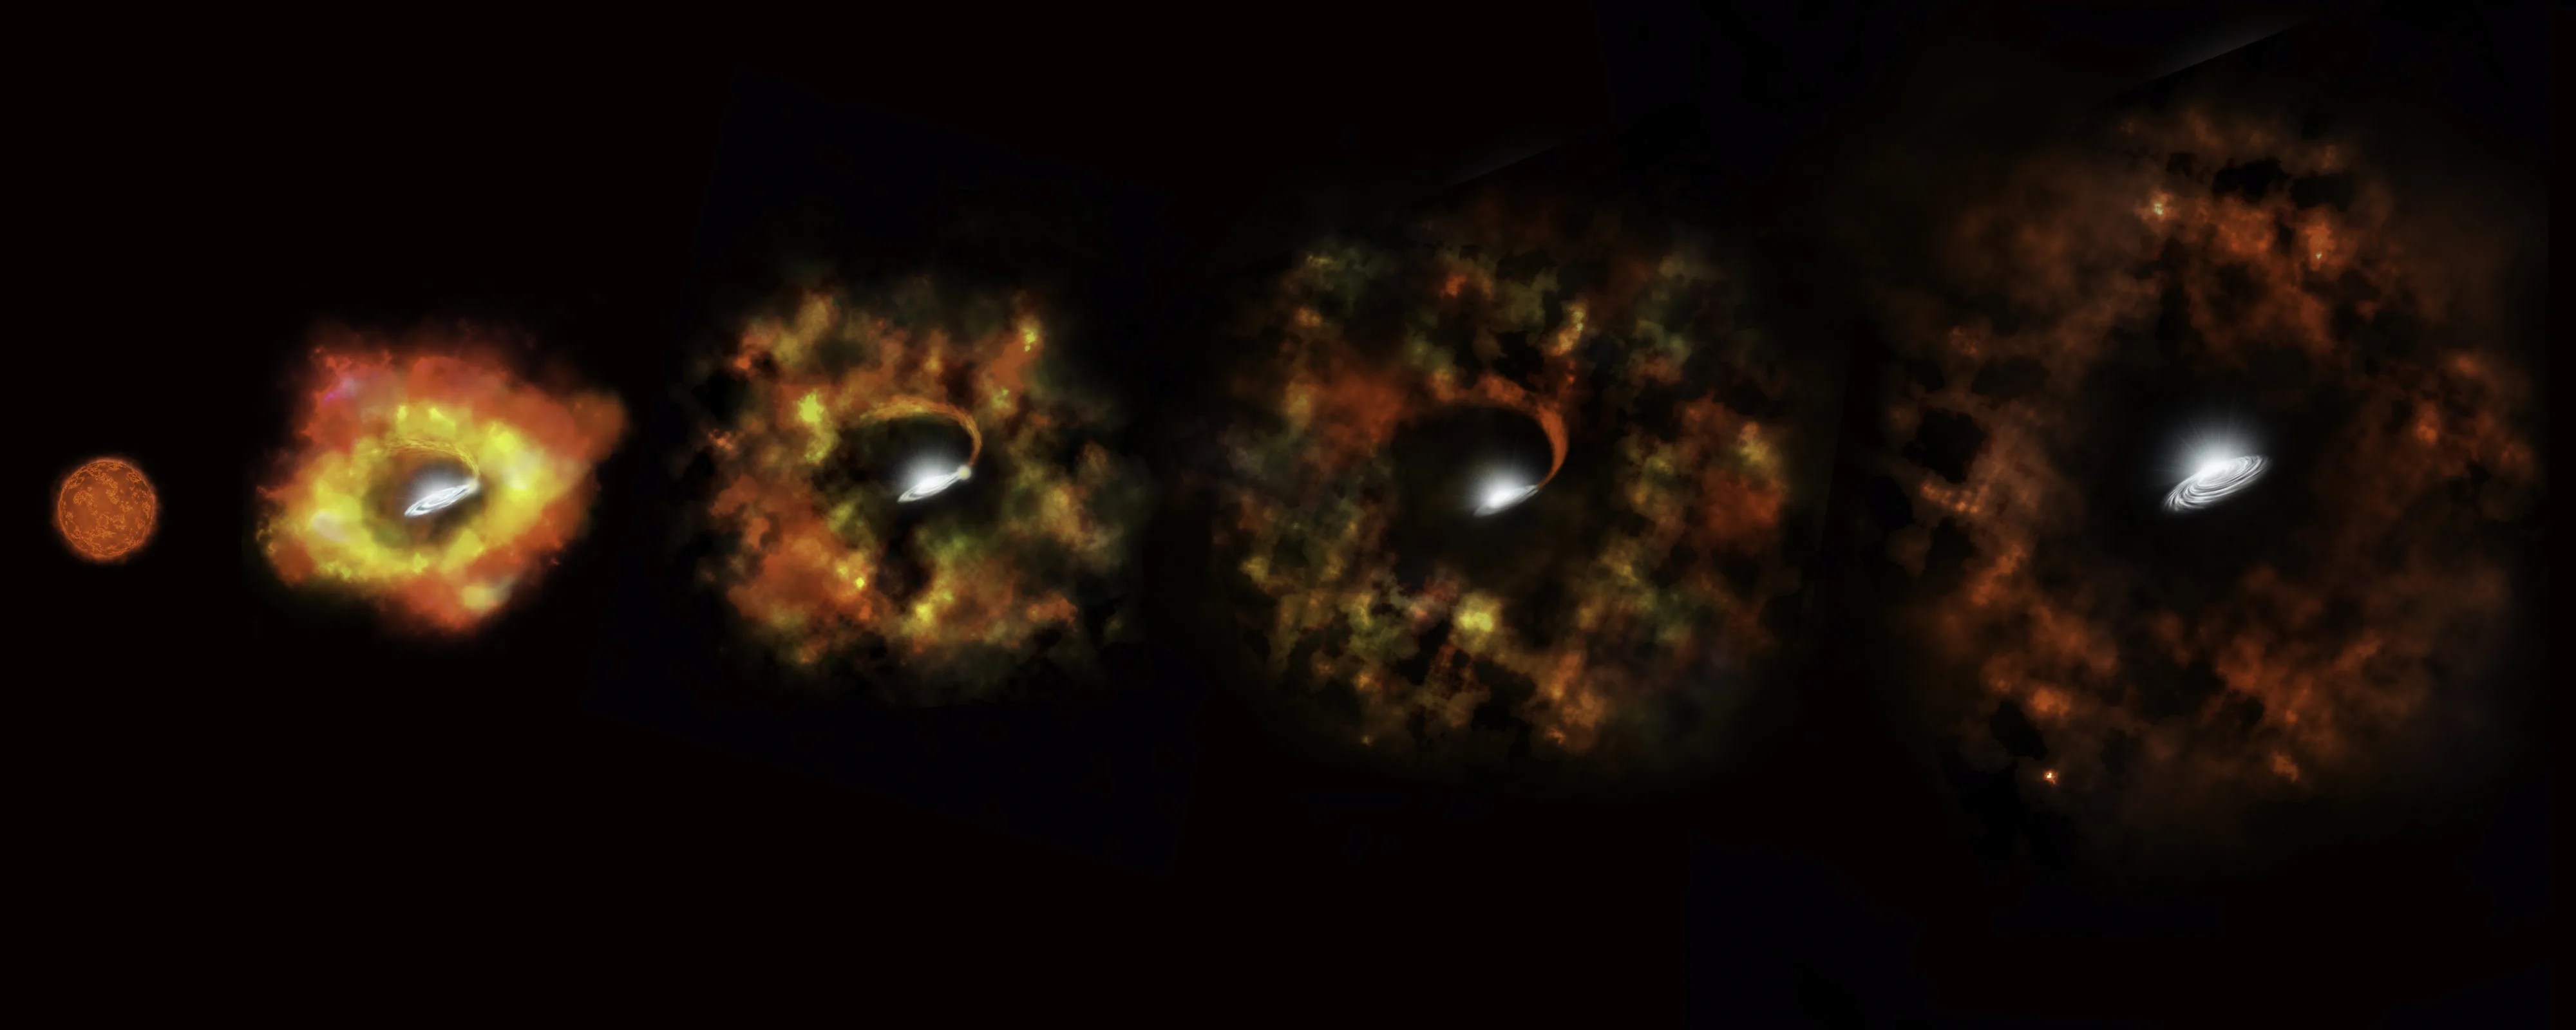 five images showing the sequence of a supernova